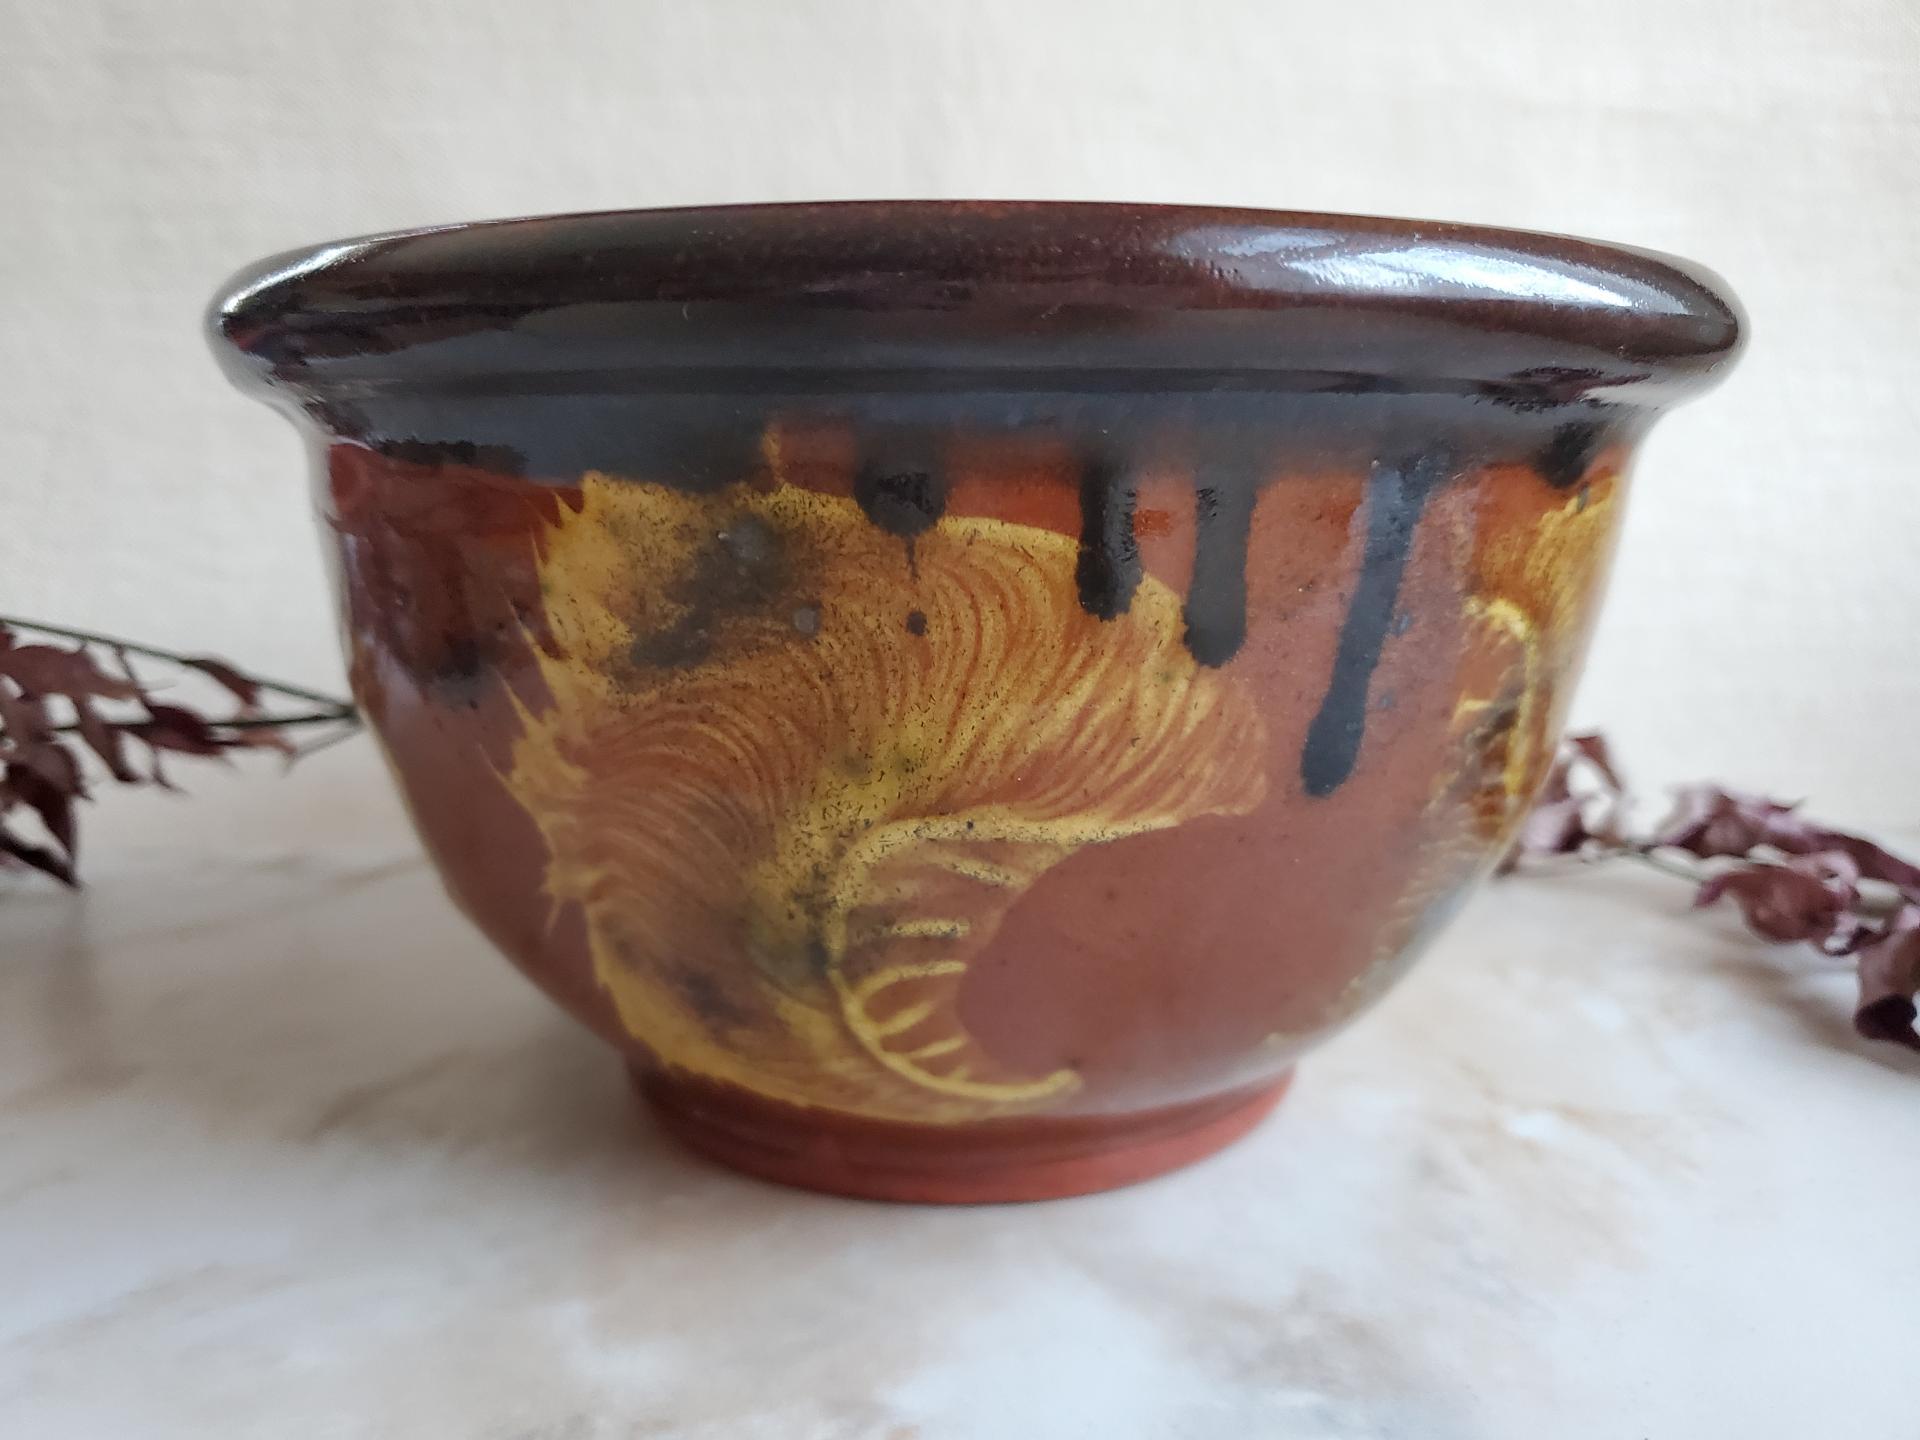 Redware 8 in Large Bowl with Spangles and Daubs Decoration